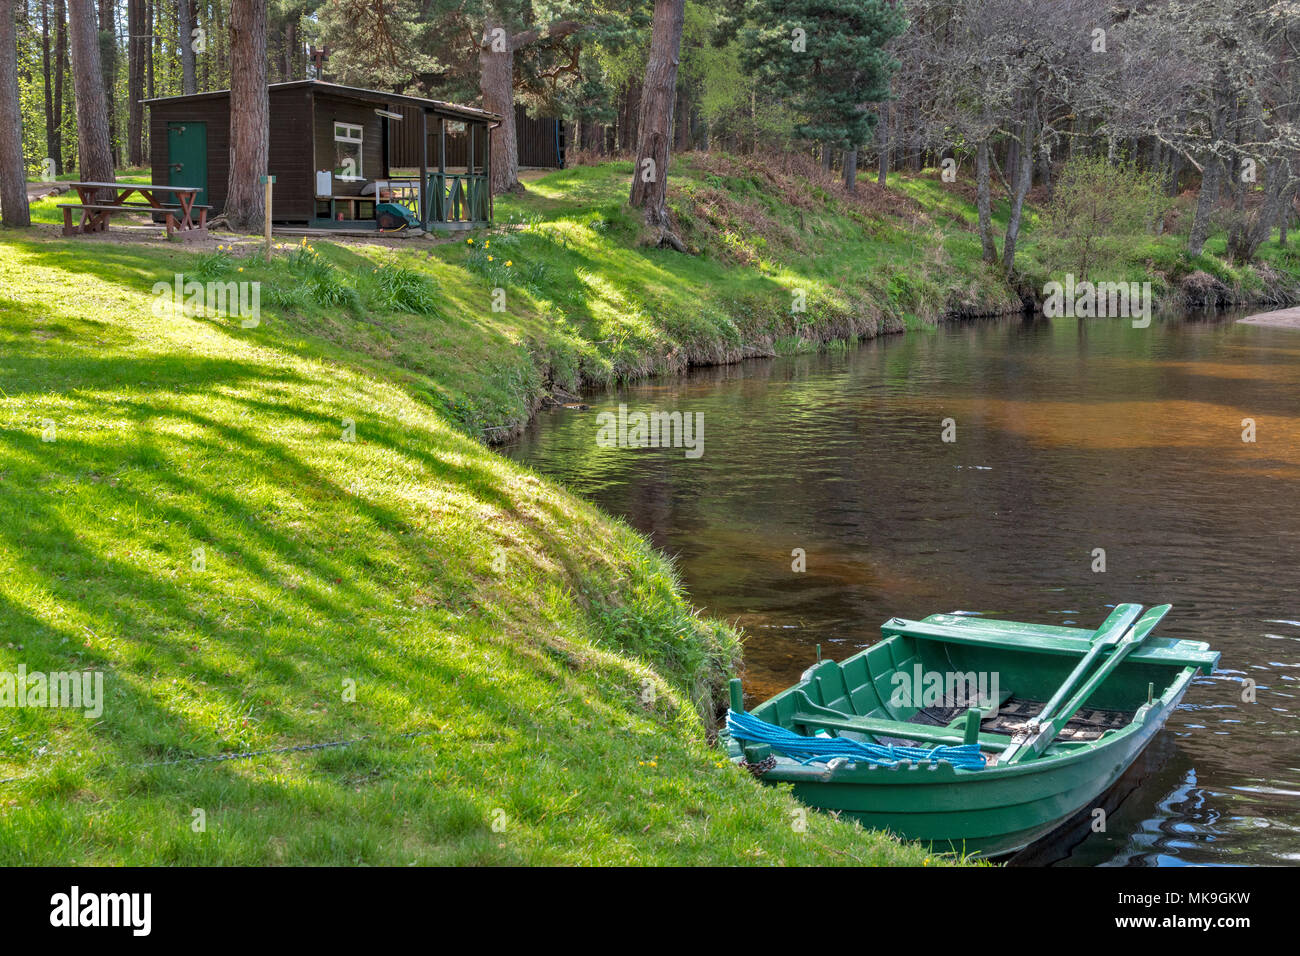 SPEYSIDE WAY RIVER SPEY SCOTLAND AT TAMDHU WITH GREEN FISHING BOAT AND WOODEN HUT IN EARLY SPRING Stock Photo